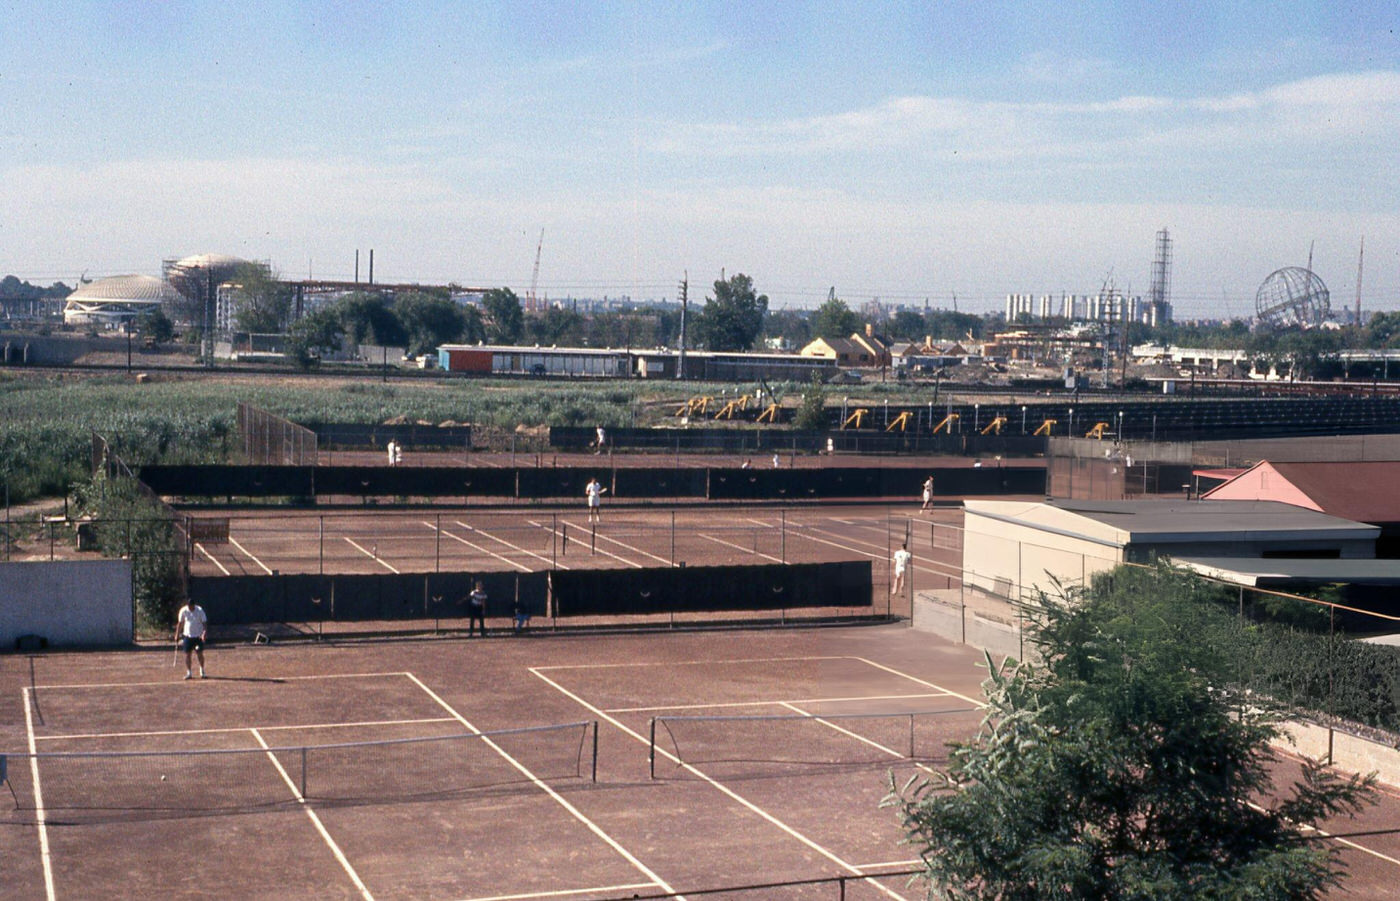 The Tennis Courts At Flushing Meadows Park In Corona, Queens, With The Construction Site For The 1964/1965 World'S Fair In The Background, 1963.